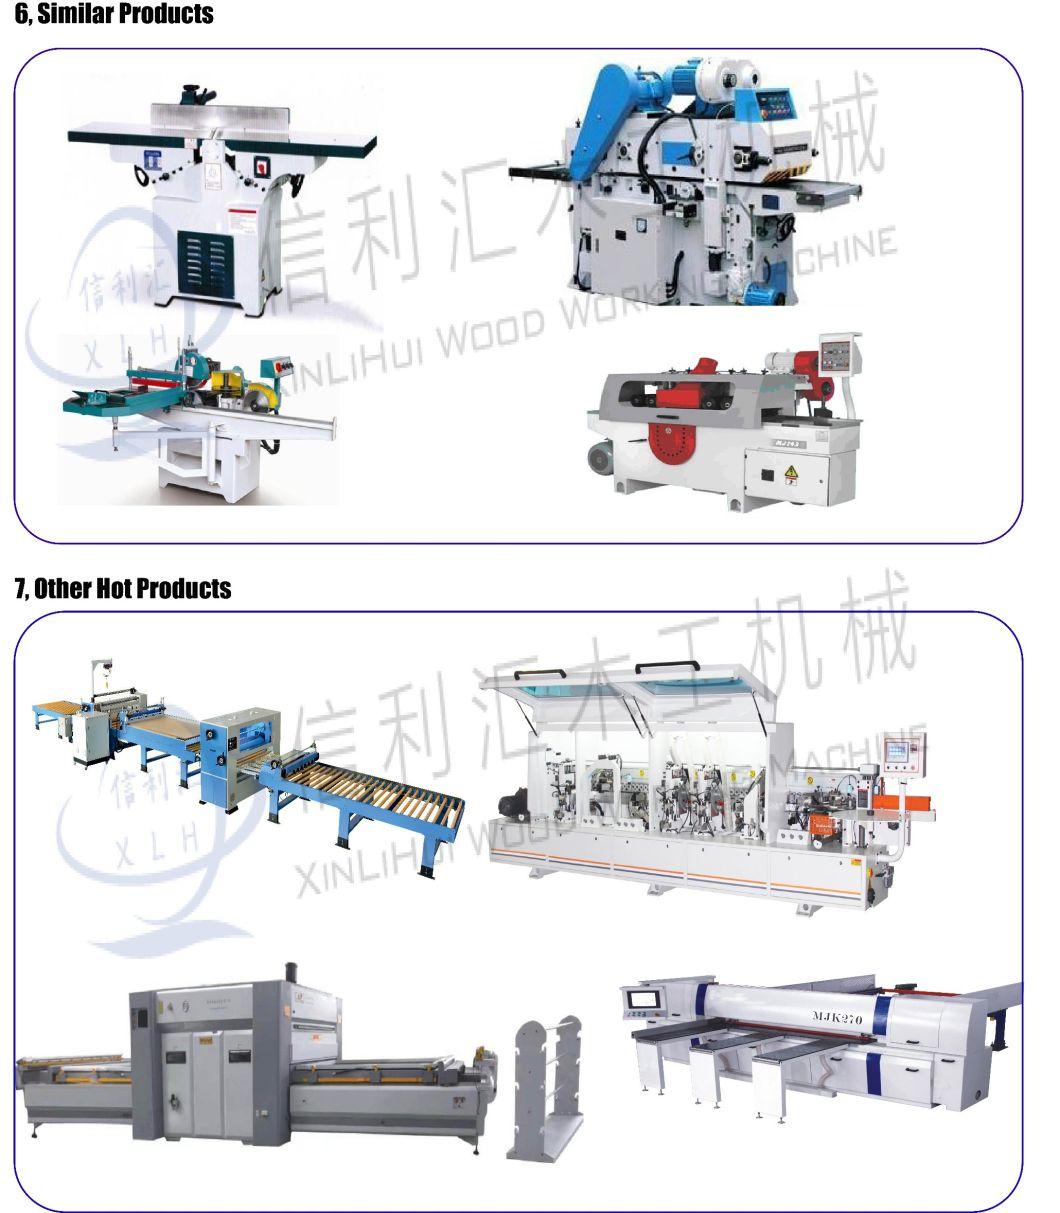 Combine Woodworking Machine, Um400an Combination Machine What Can Do All in One: Thickner / Ring Saw / Sander / Drill / Spindle Combine Machine a Bois